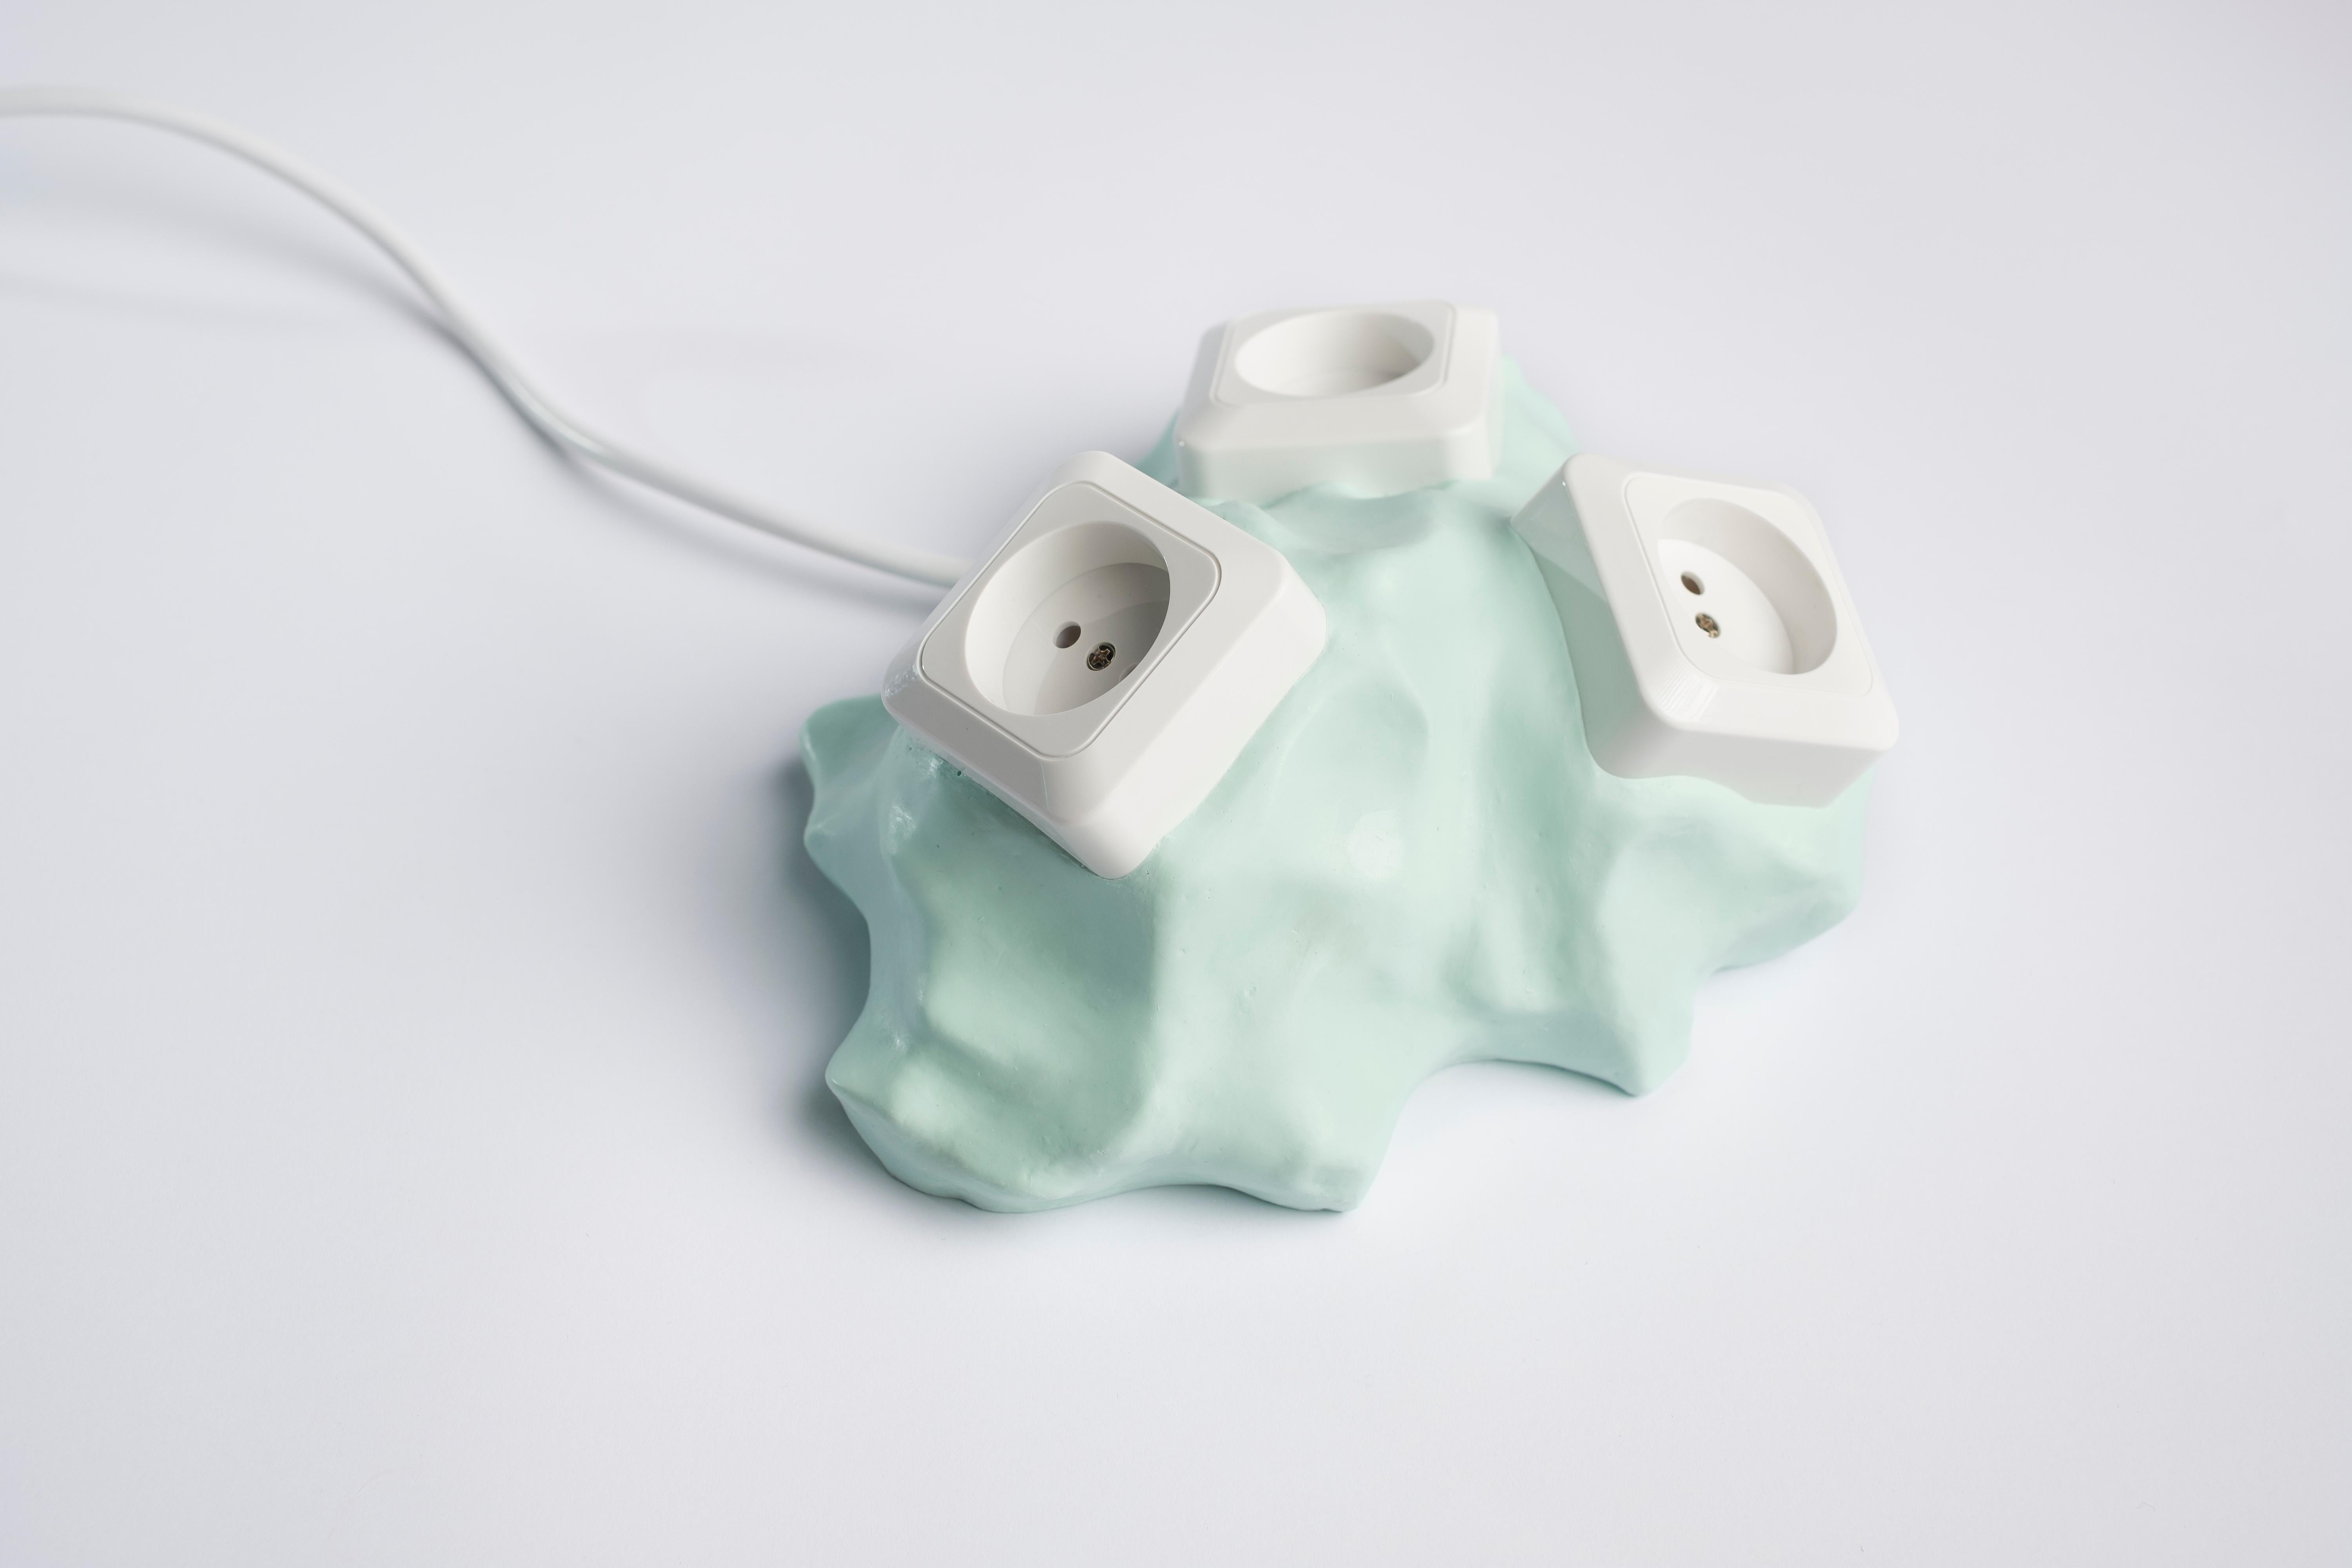 Tripple socket object 23. Mint Saker by Studio Gert Wessels, mint. Hand crafted in an organic shape and made in his studio in the Netherlands. 

In his daily practice he investigates the relationship between form and function. The result is a